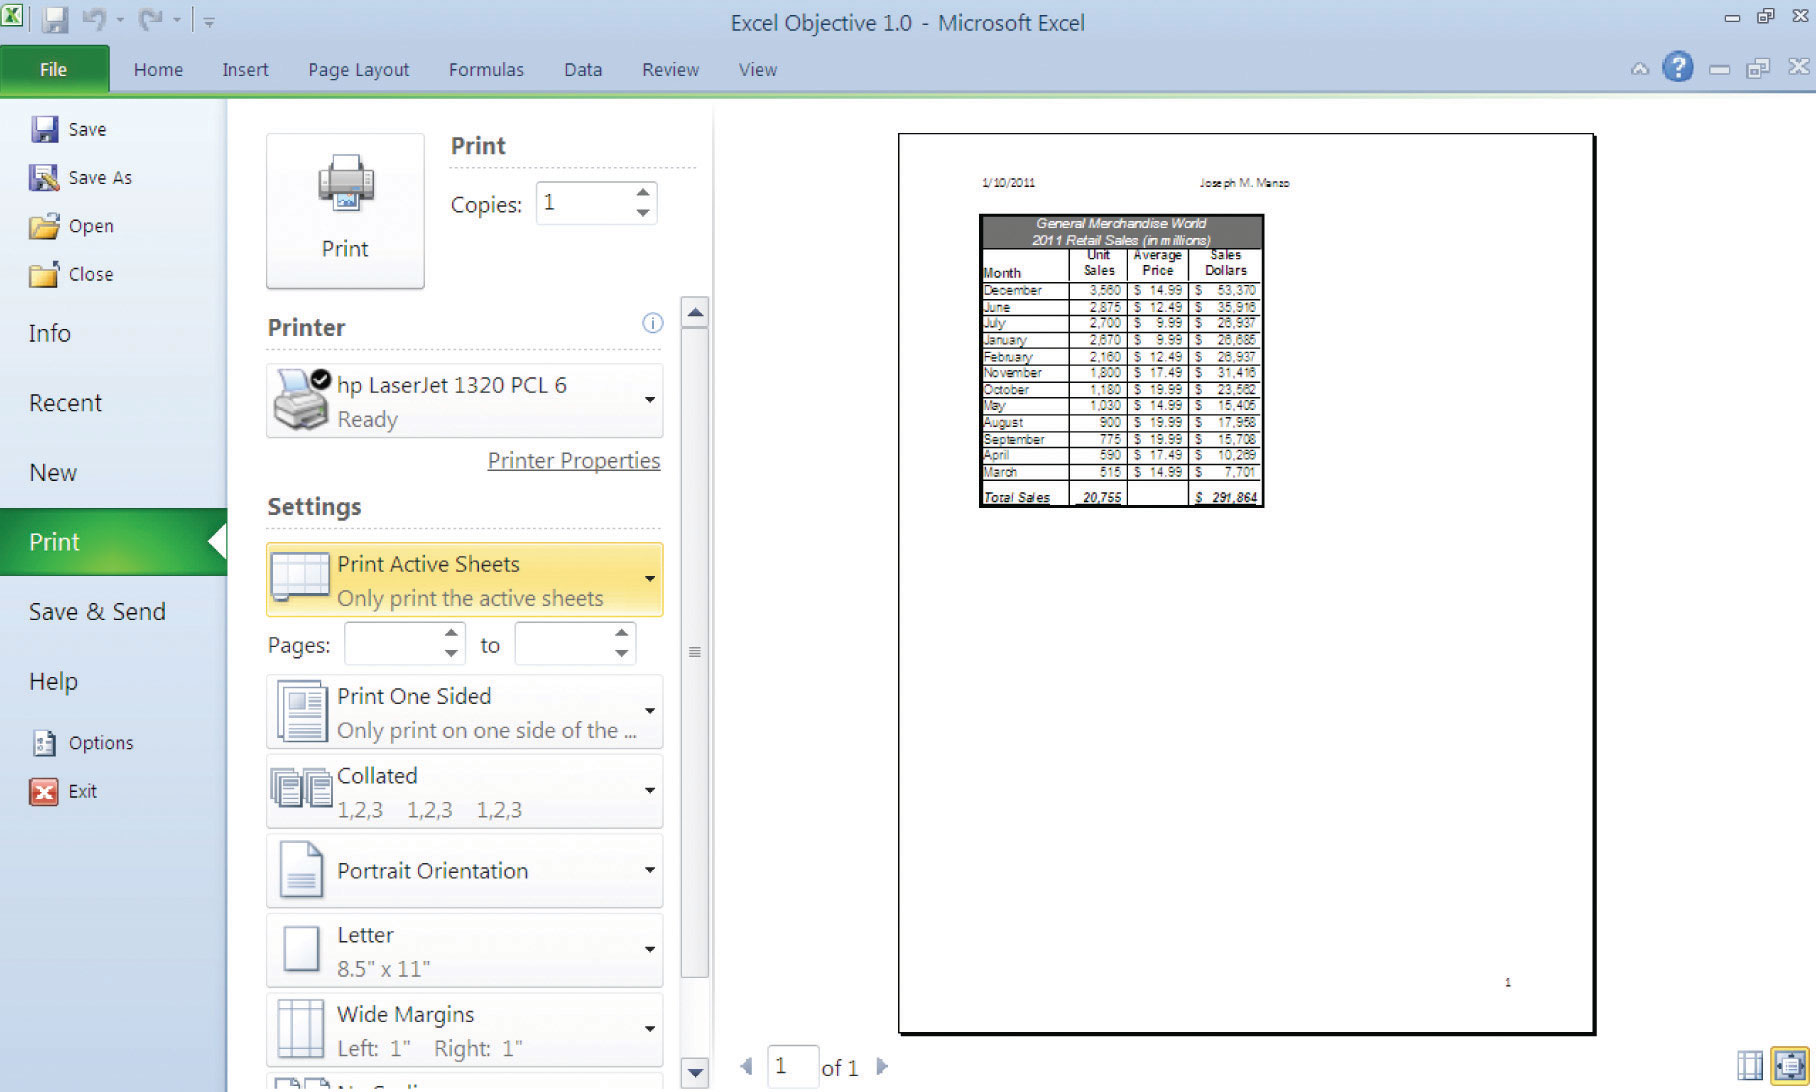 Document Of Print Worksheets On One Page Excel with Print Worksheets On One Page Excel for Google Sheet